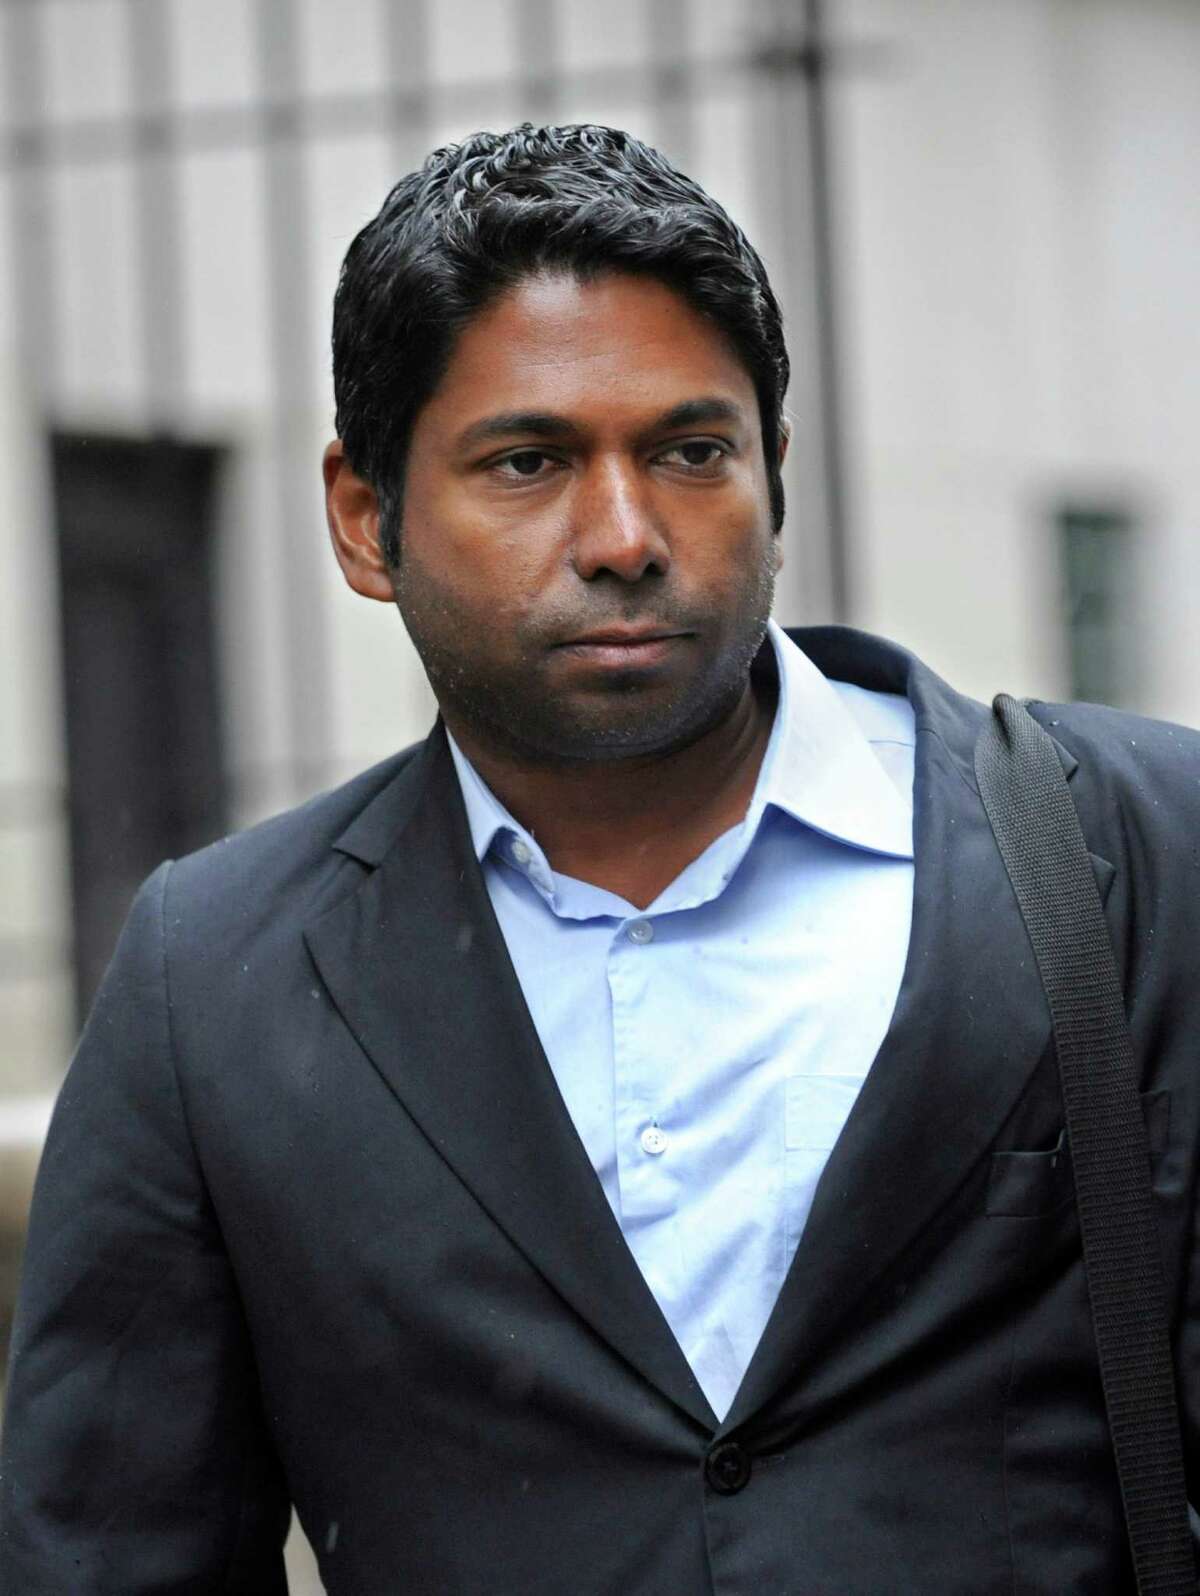 Rengan Rajaratnam exits Manhattan federal court, Monday, March 25, 2013, in New York. The brother of jailed one-time billionaire hedge fund boss Raj Rajaratnam entered a not guilty plea to federal insider trading charges. and was released on a one million dollar bond. (AP Photo/ Louis Lanzano)